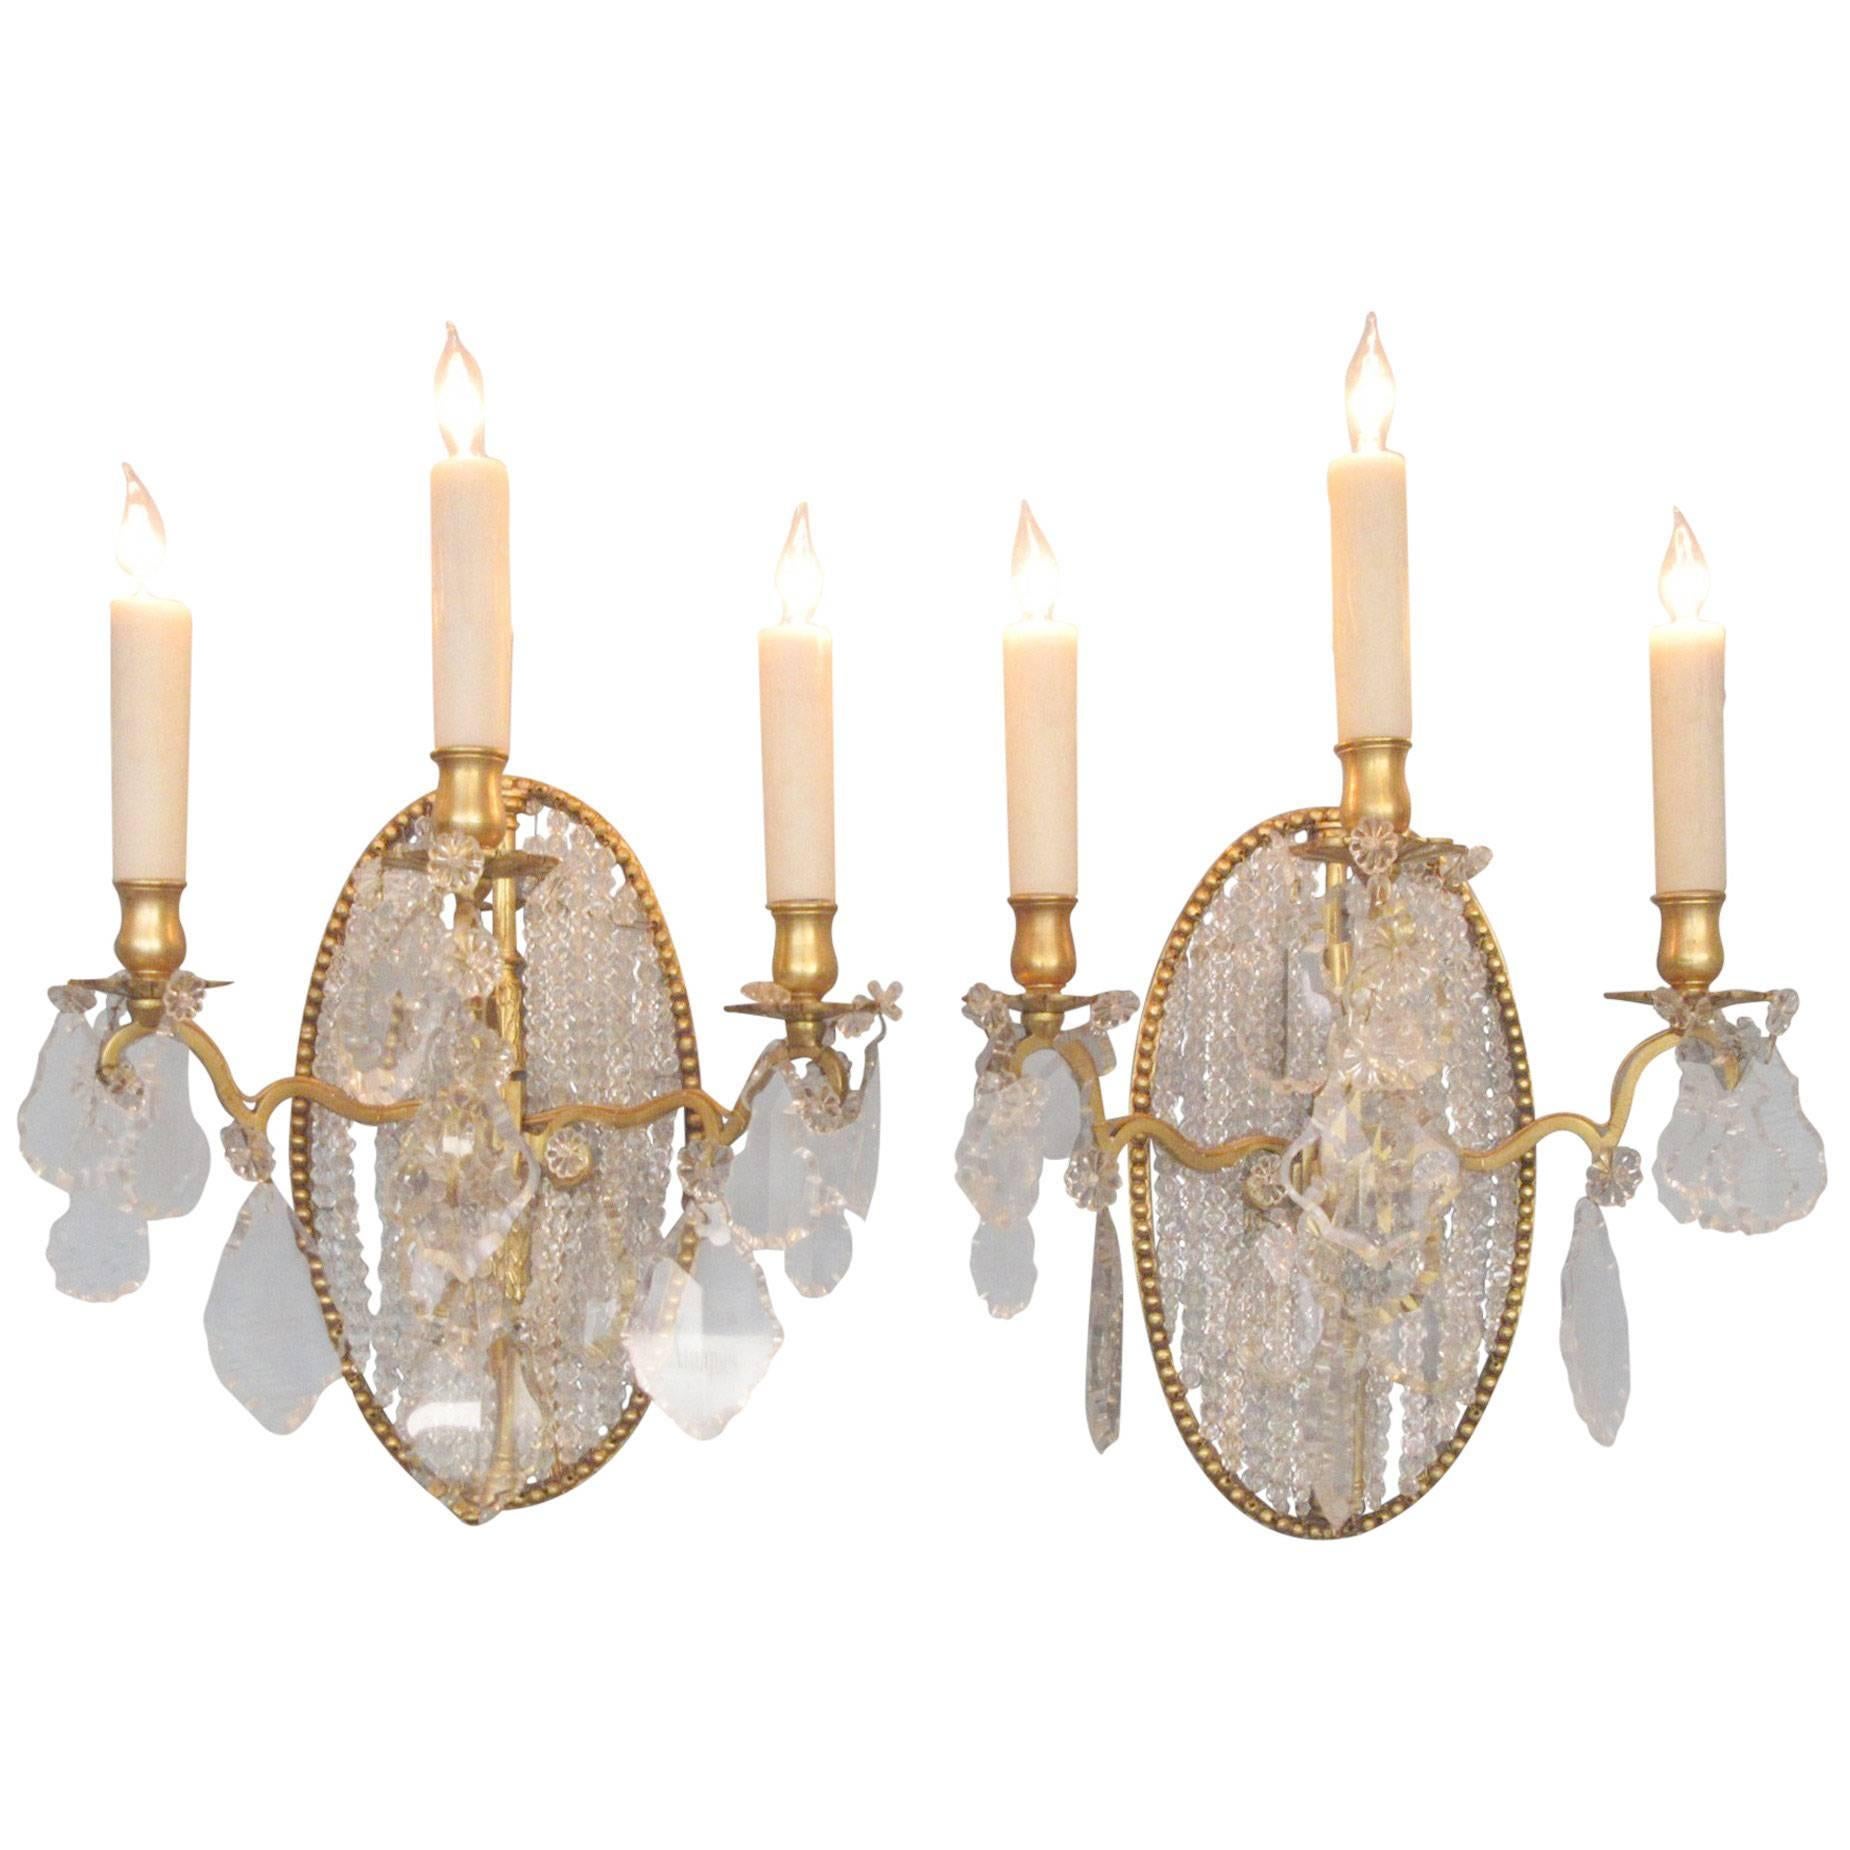 Pair of Early 19th Century Italian Neoclassical Crystal Medallion Back Sconces